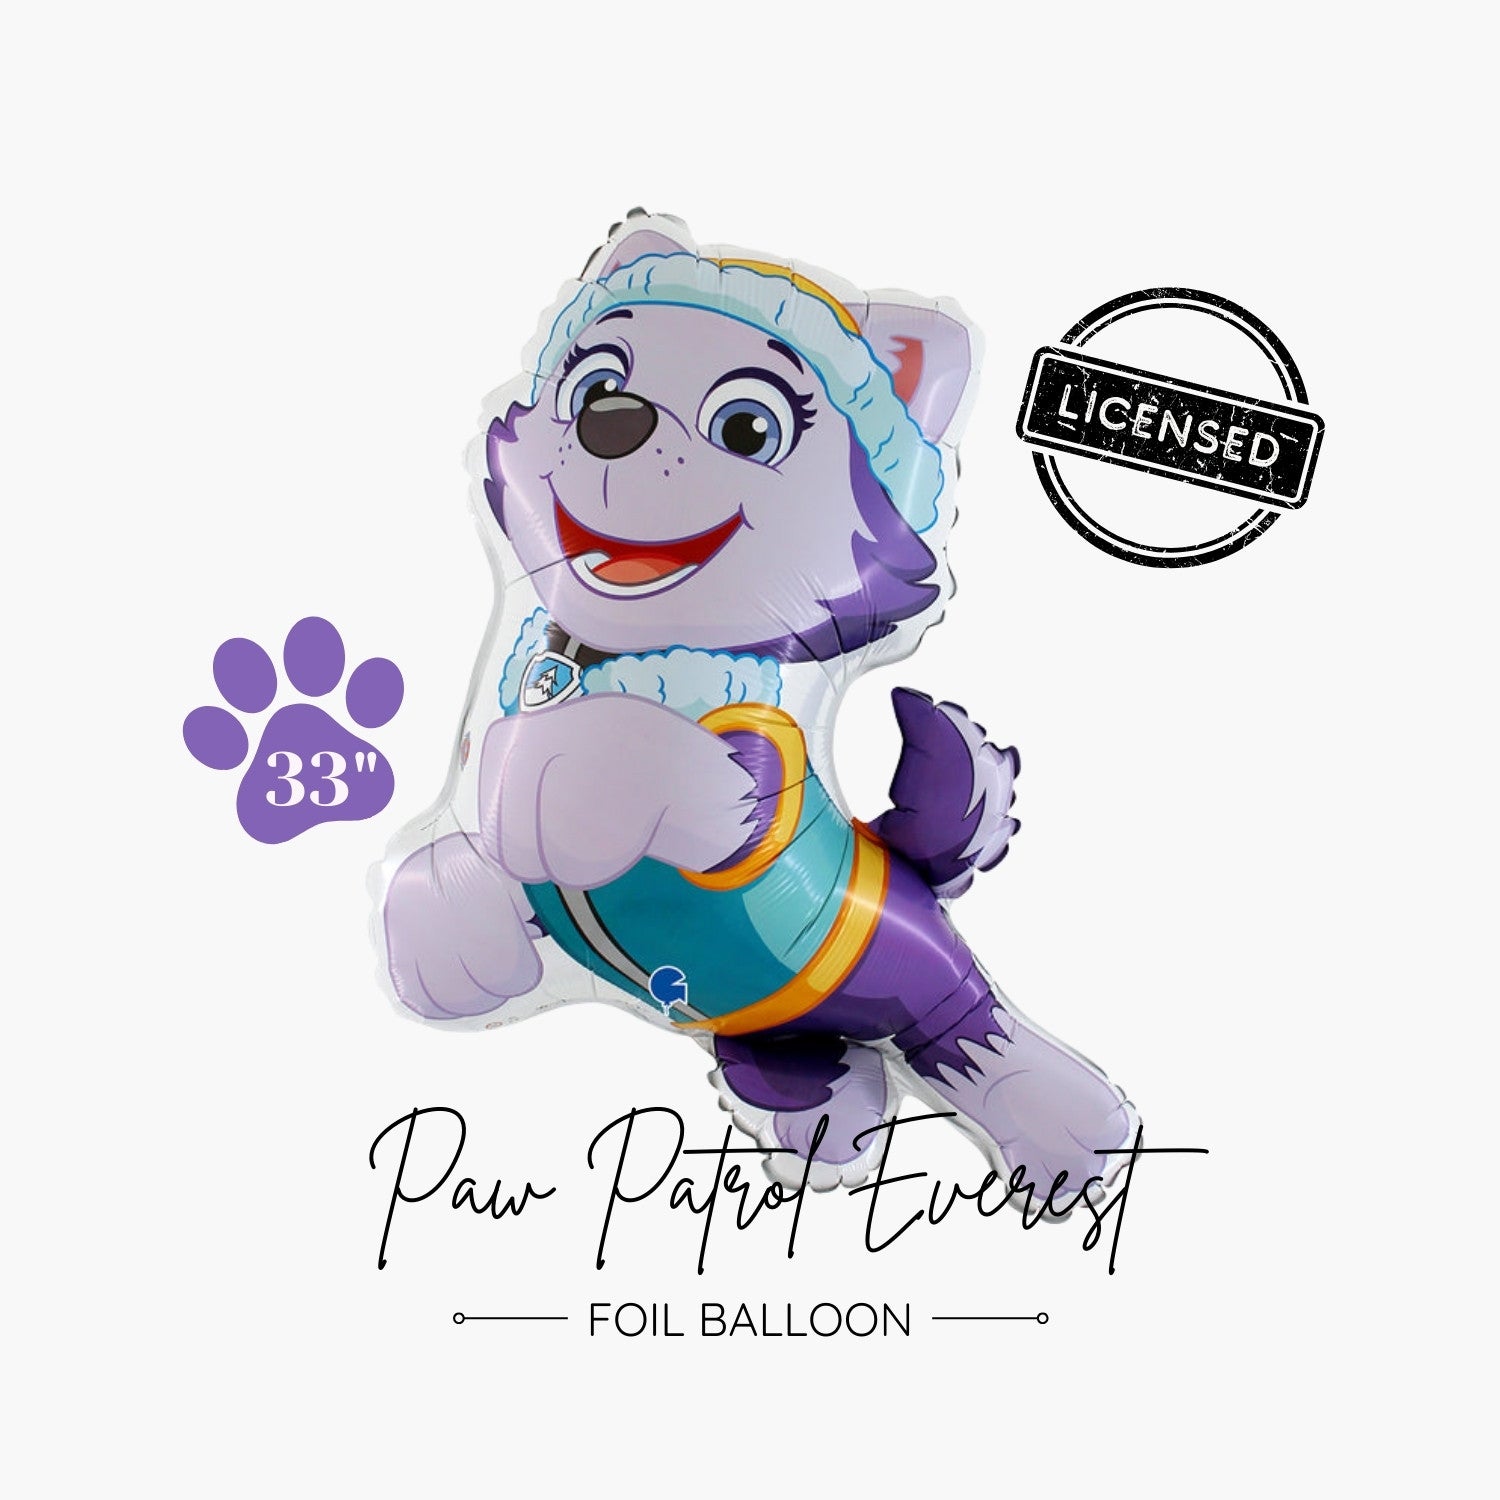 Licensed Paw Patrol Everest Foil Balloon 33" - Paw Patrol Kids Birthday Party Decorations